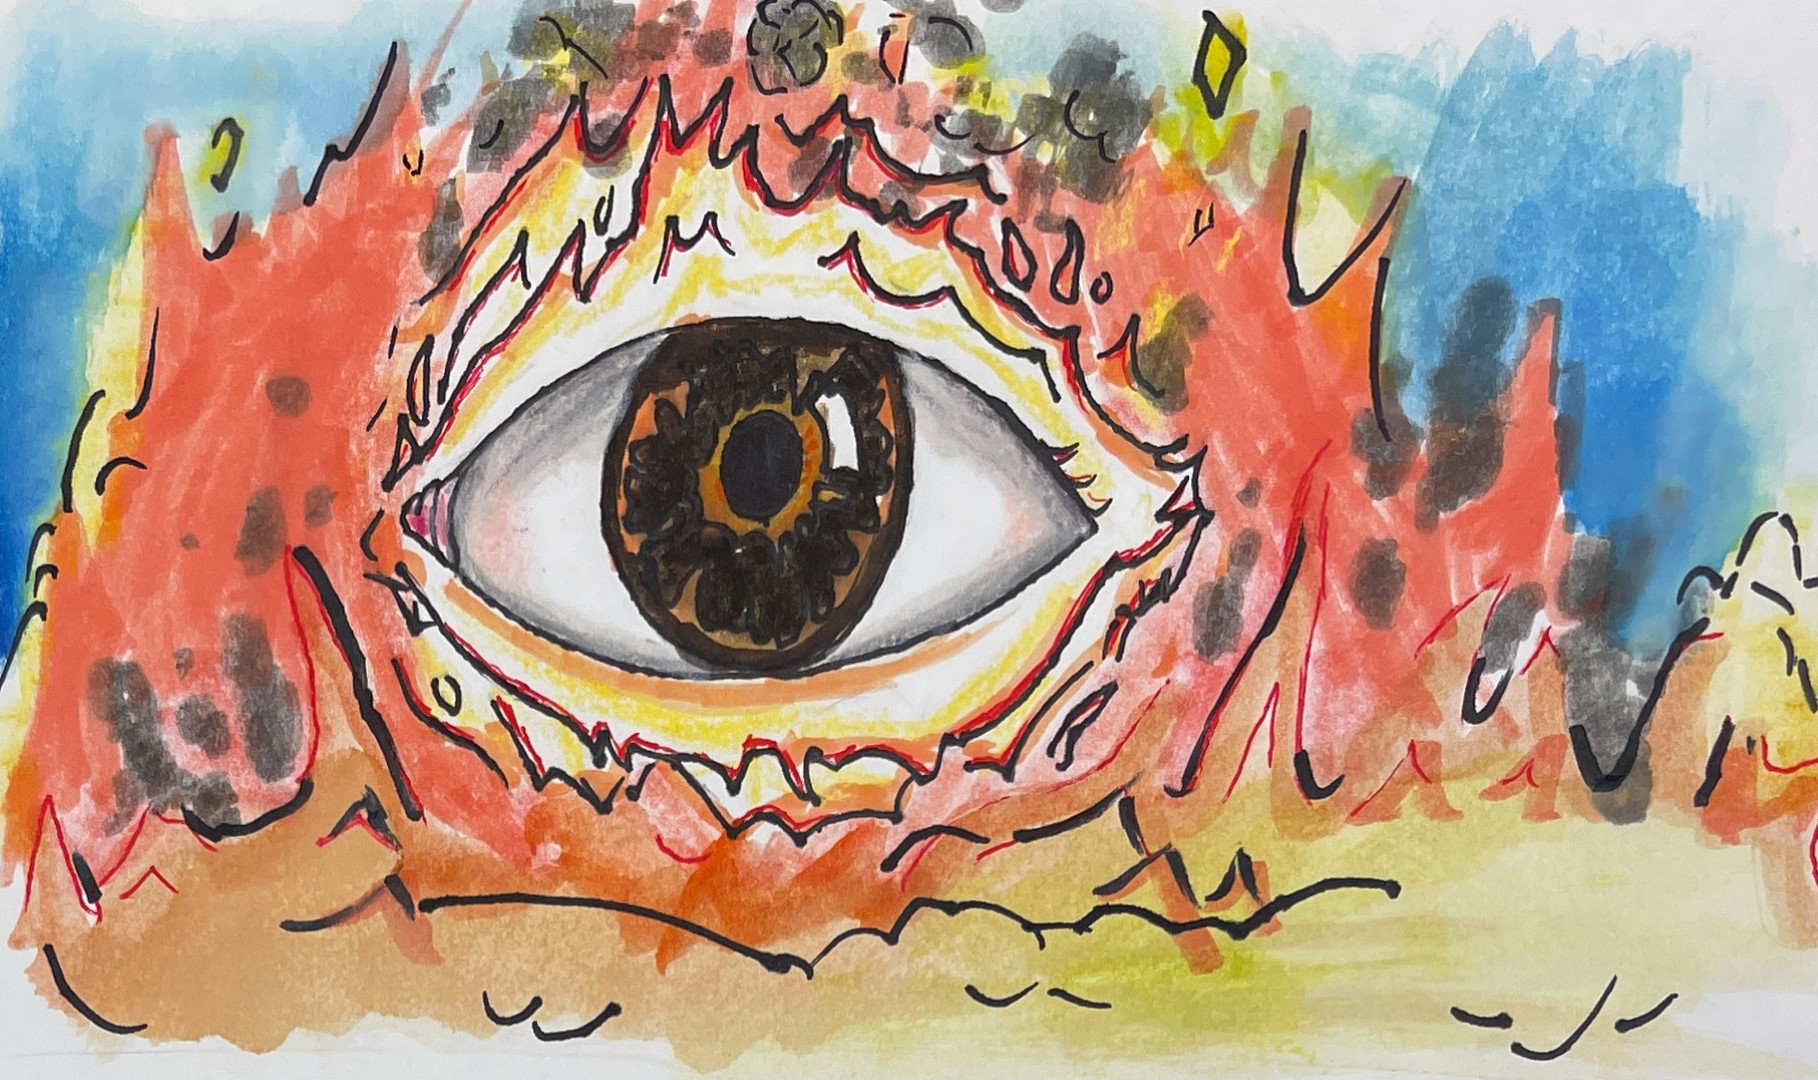 "Eye of the Fire" by August Clark